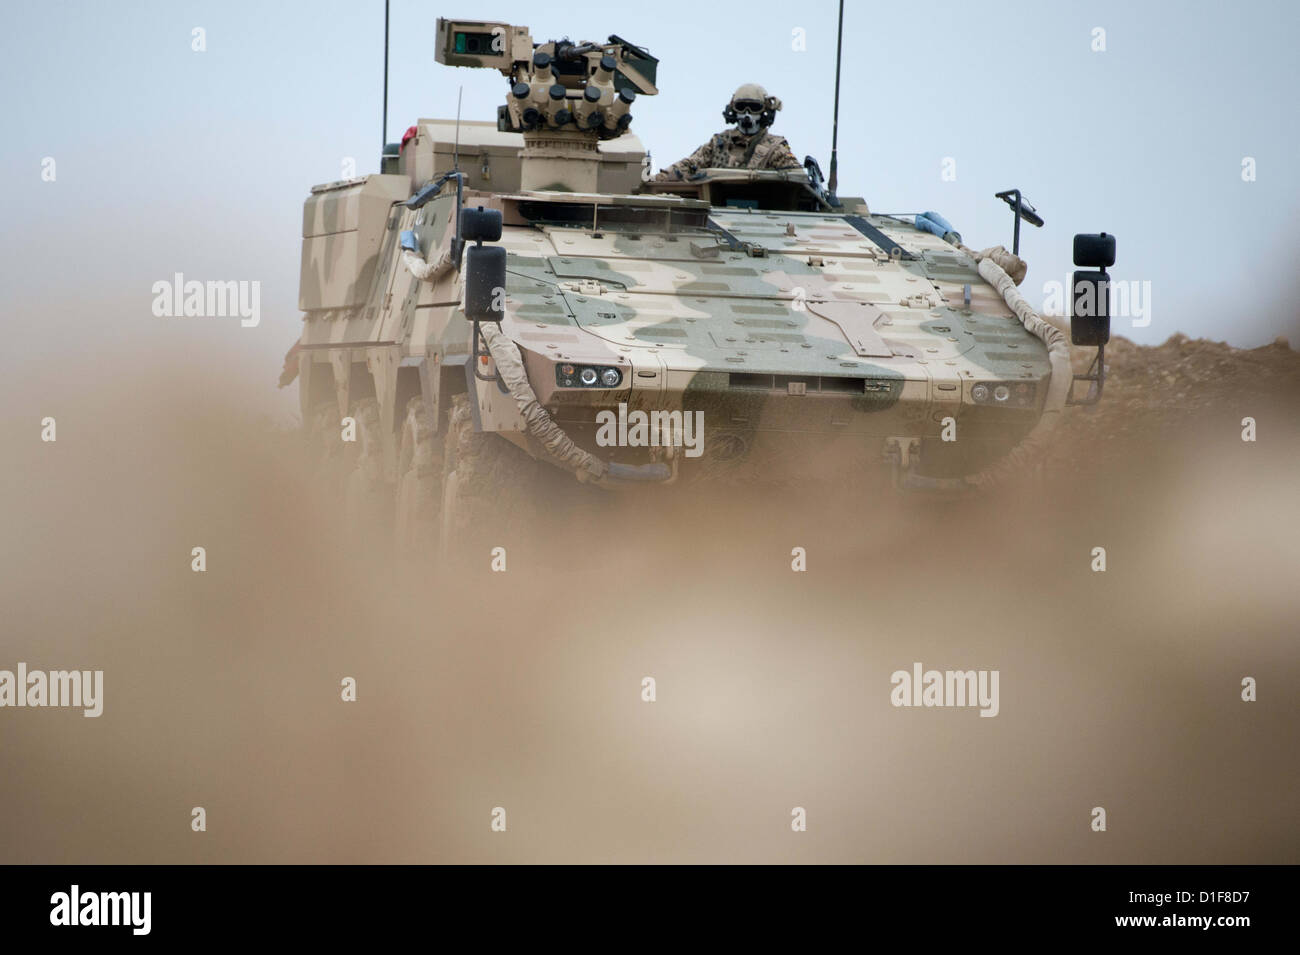 A Boxer tank of the German Armed Forces is seen in Masar-i-Scharif, Afghanistan, 17 December 2012. PHOTO: MAURIZIO GAMBARINI Stock Photo